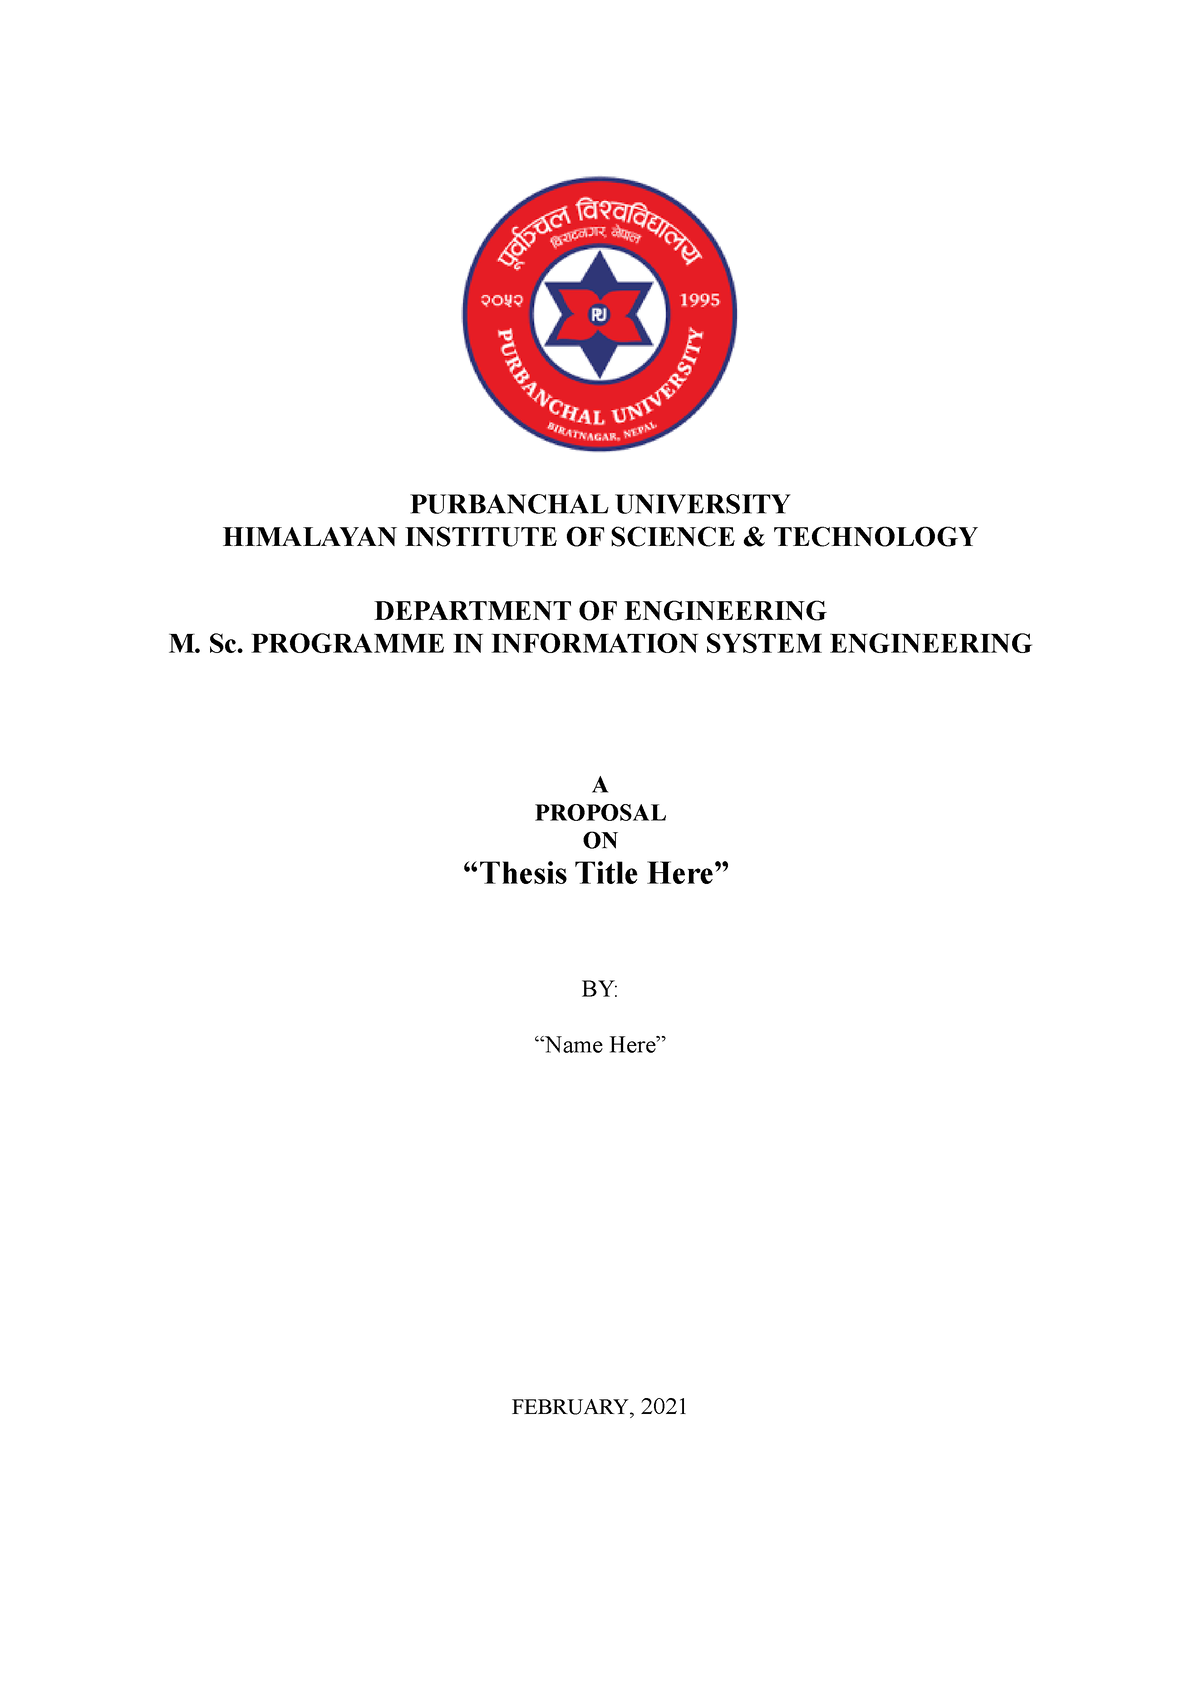 purbanchal university thesis format